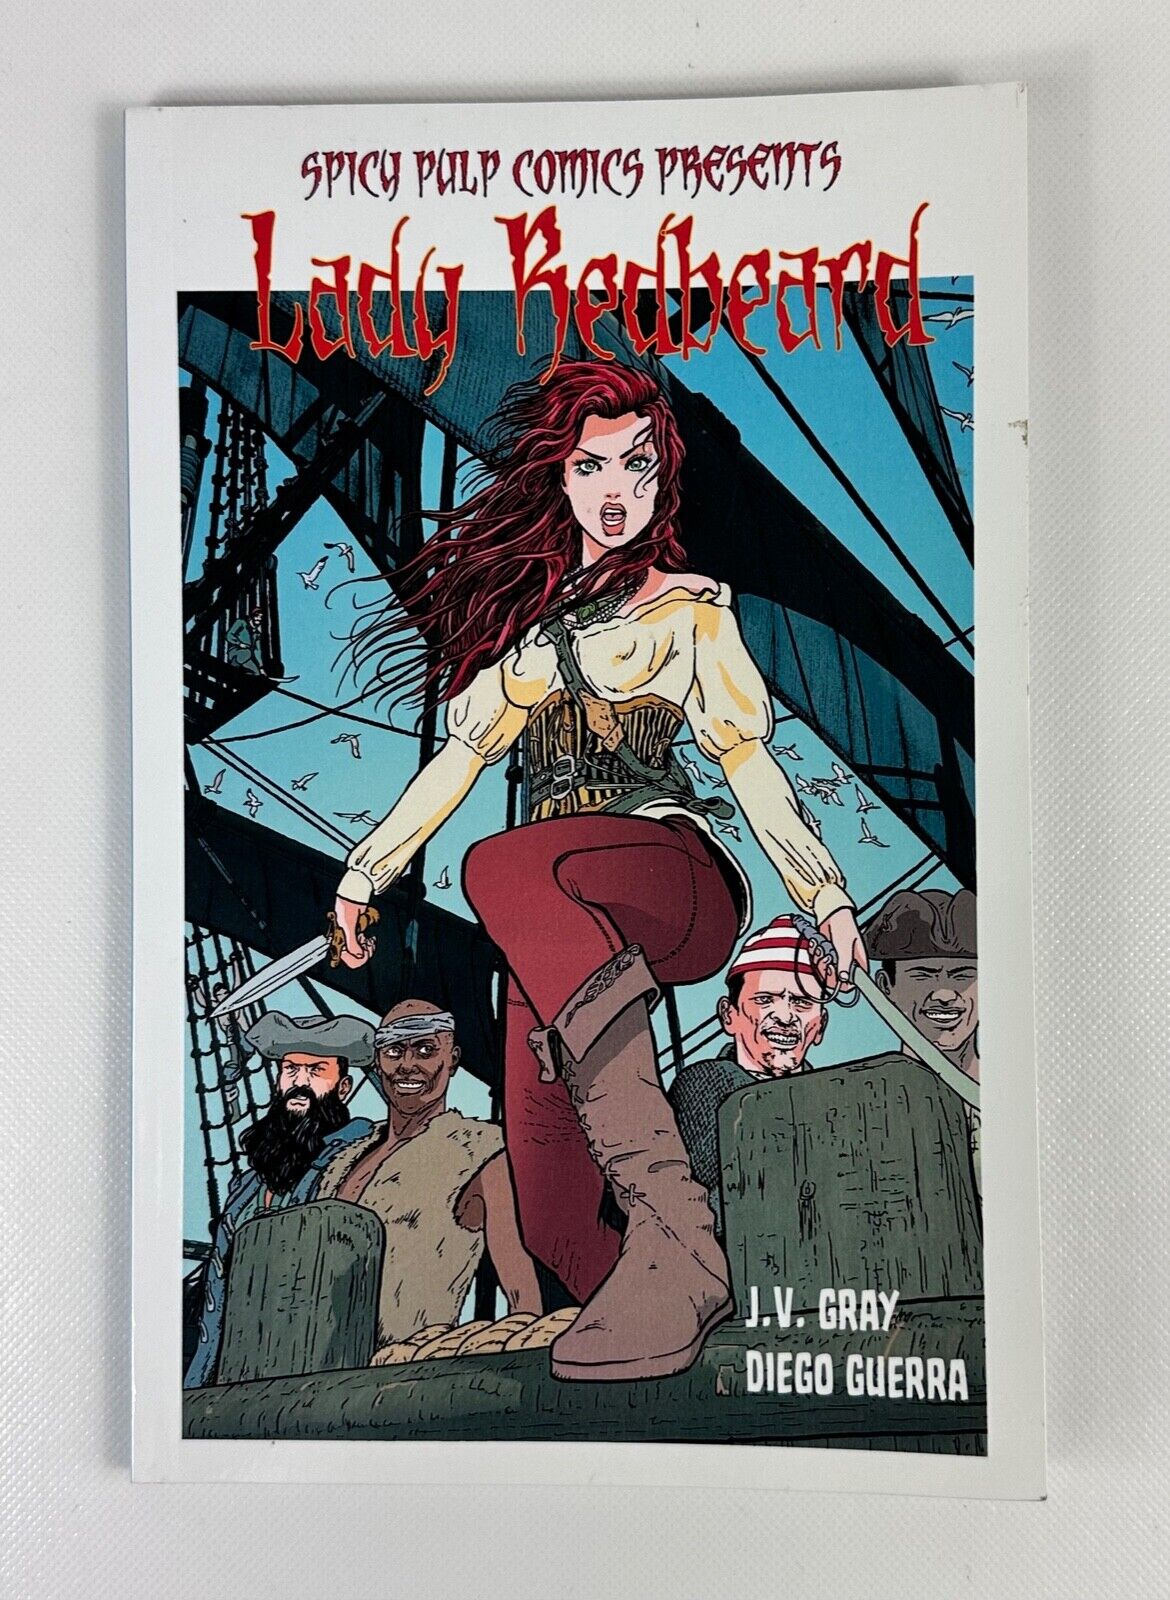 Spicy Pulp Comics Featuring Lady Redbeard by Justin Gray Signed